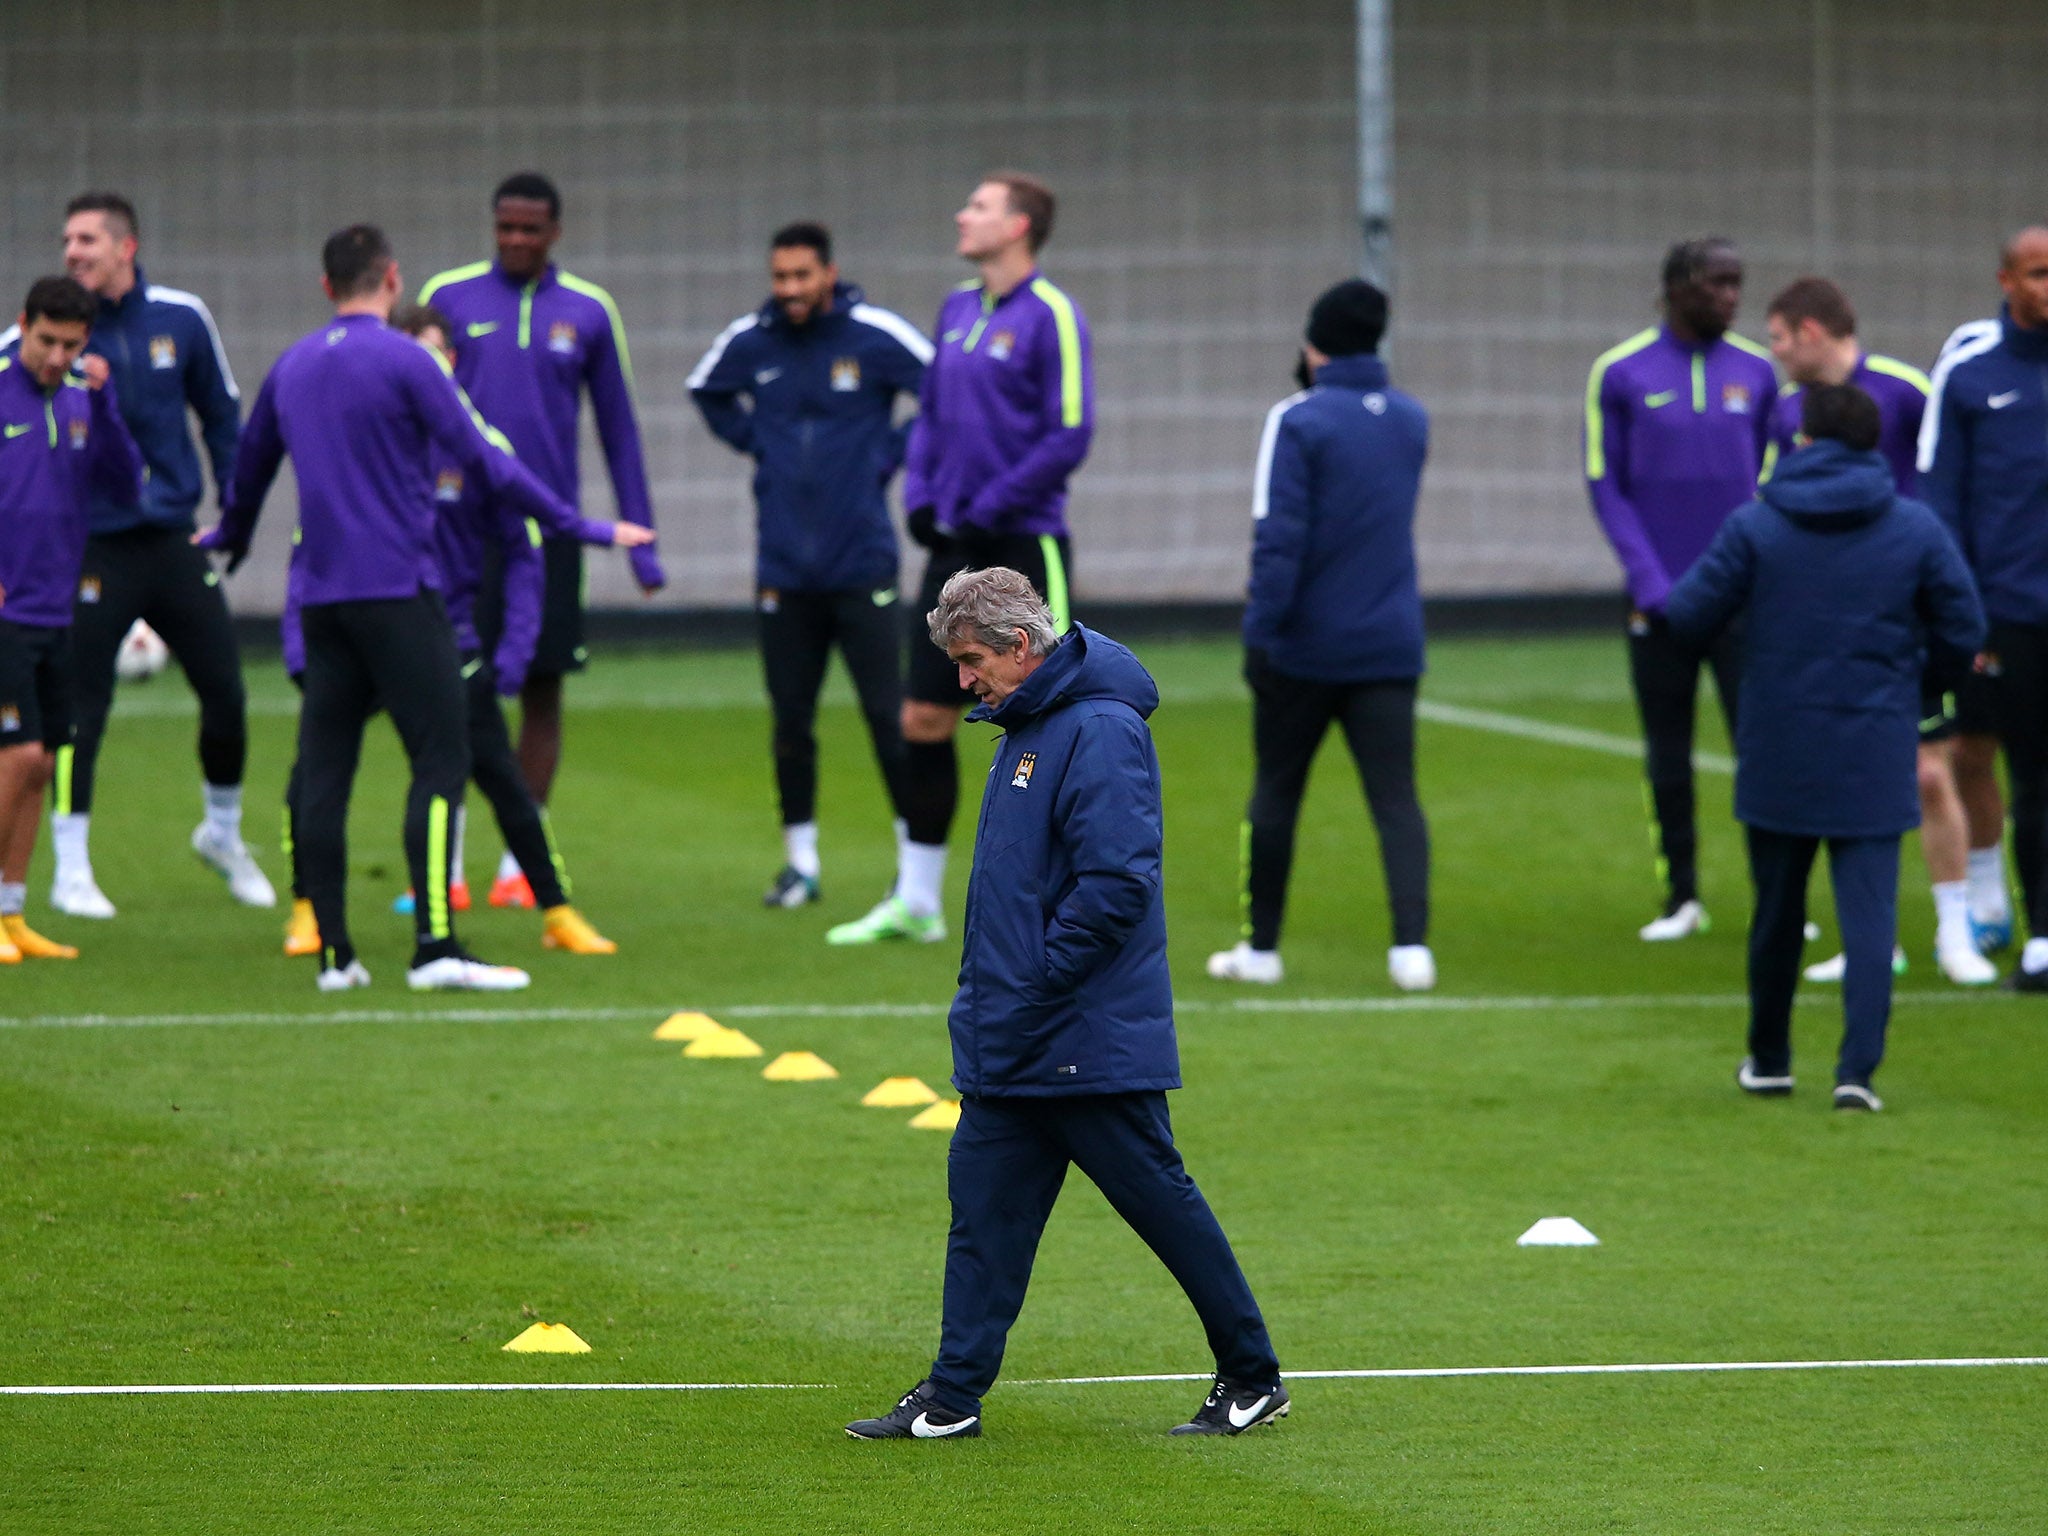 Manuel Pellegrini the manager of Manchester City walks past his players during a training session.